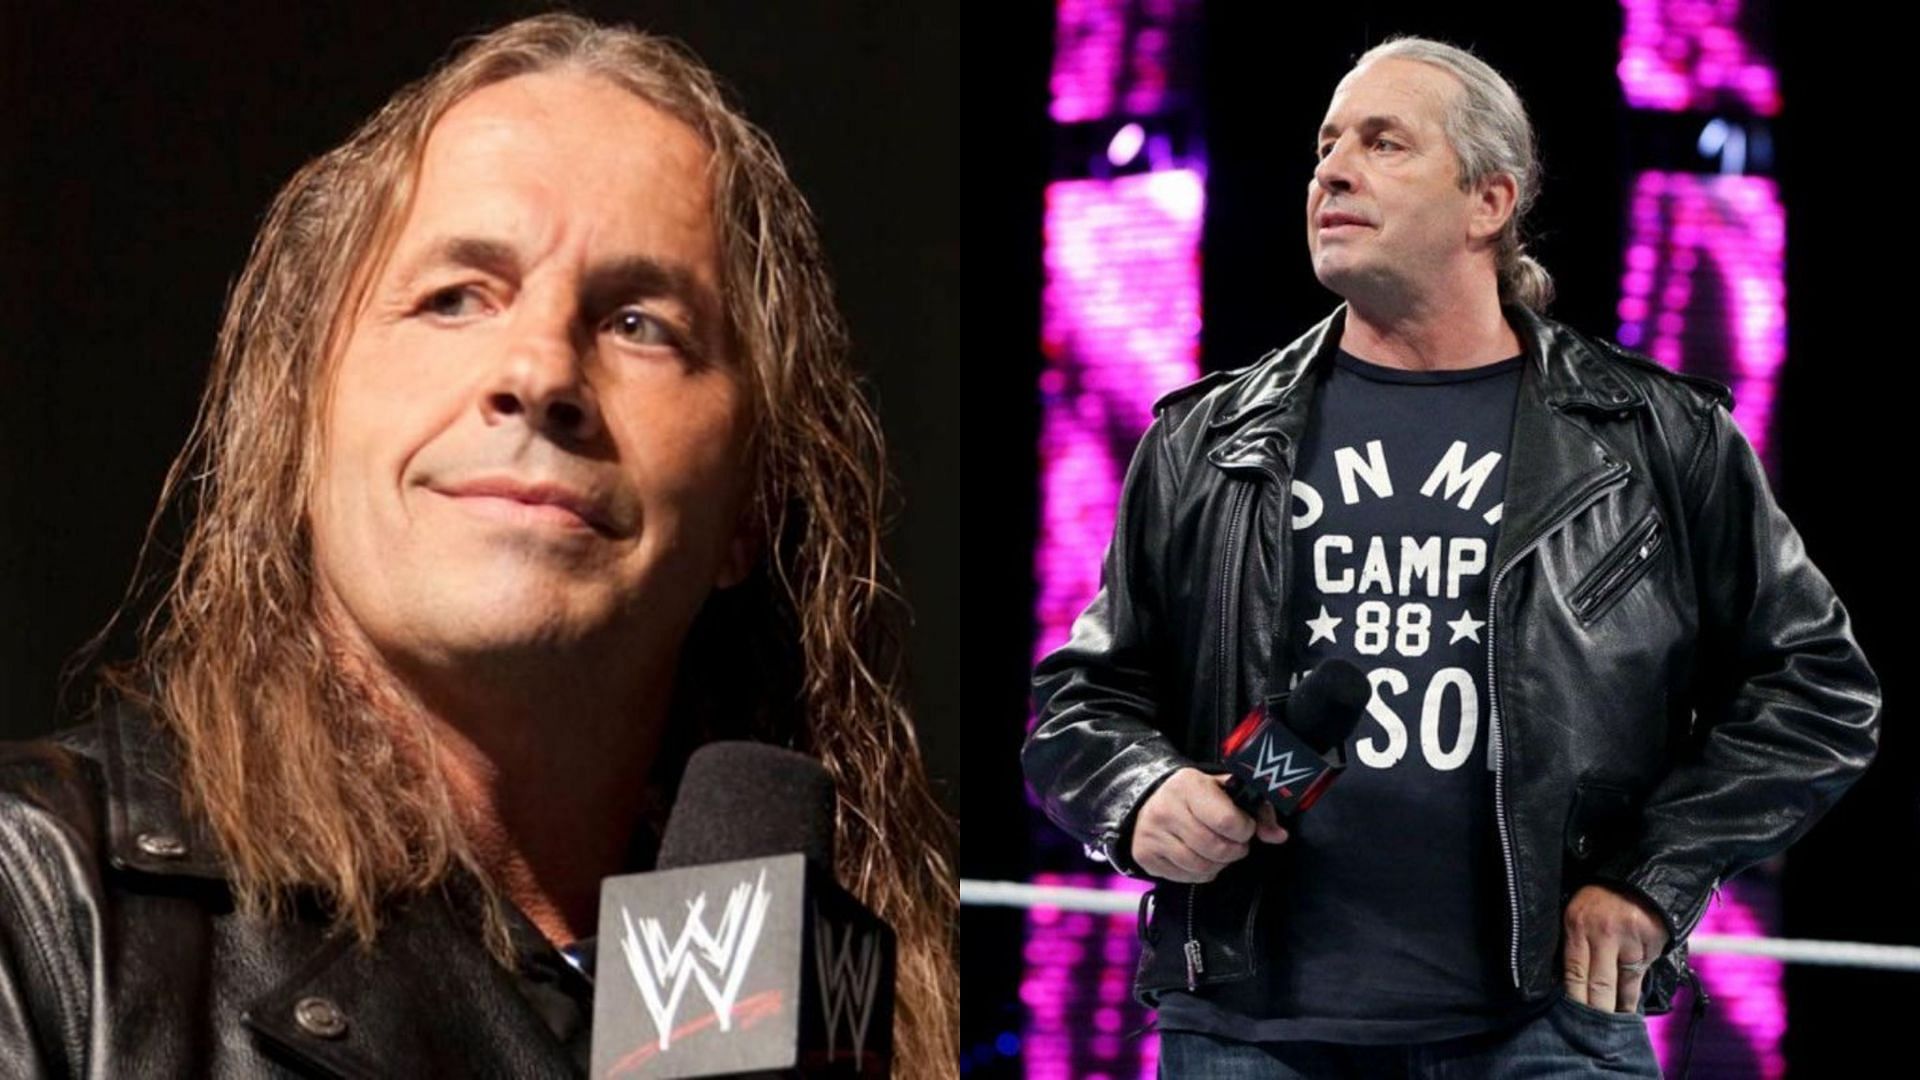 Will Bret Hart come out of retirement for one last match?